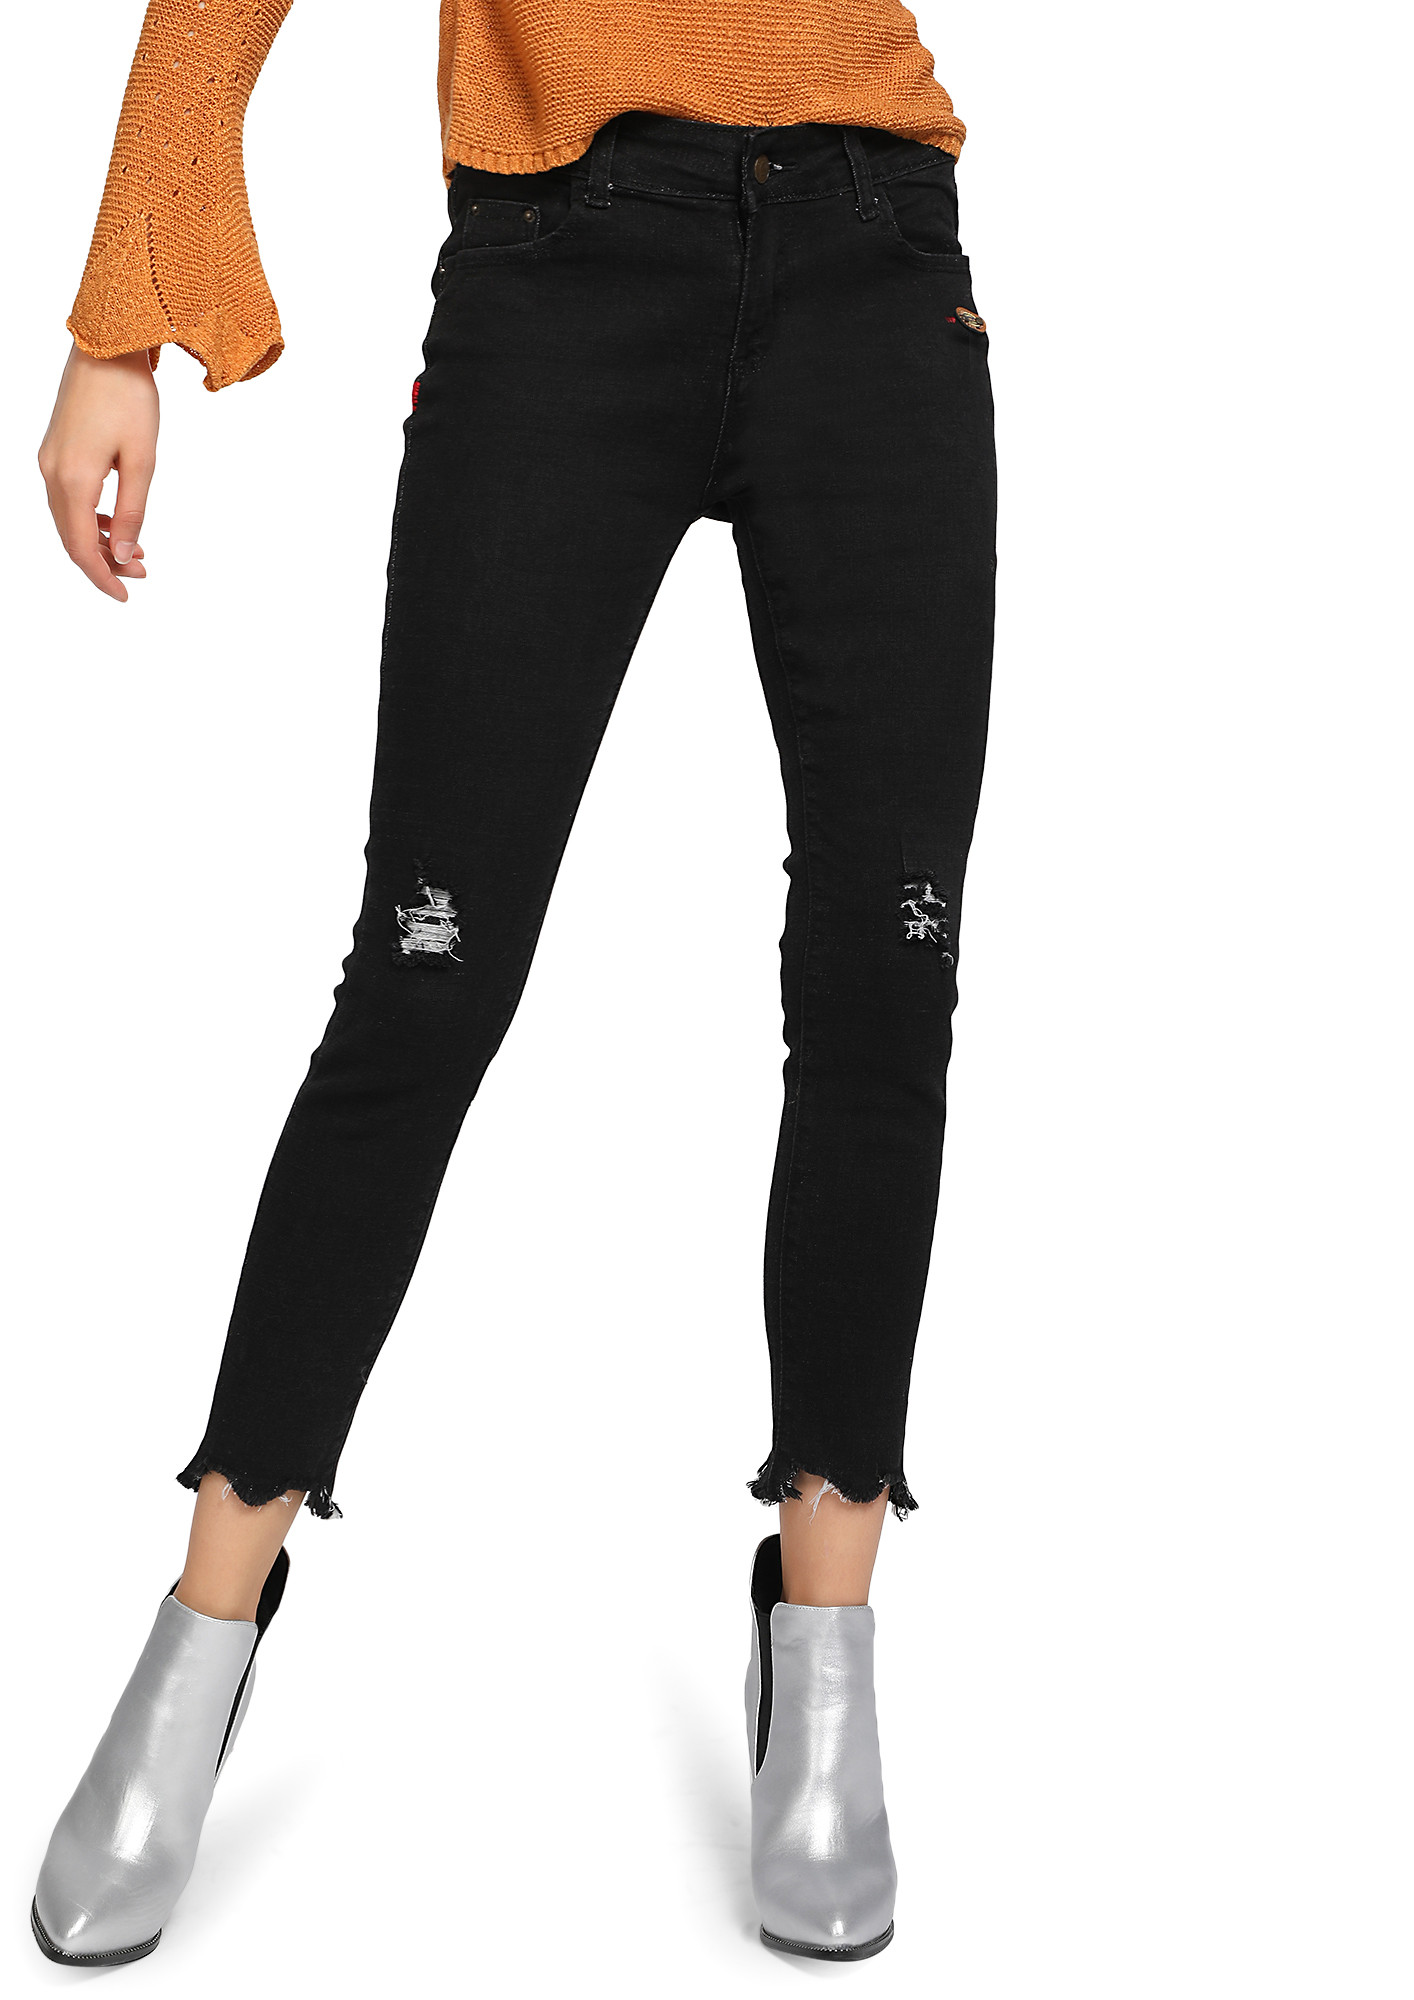 ALL ABOUT THOSE CUFFS BLACK CROPPED JEANS